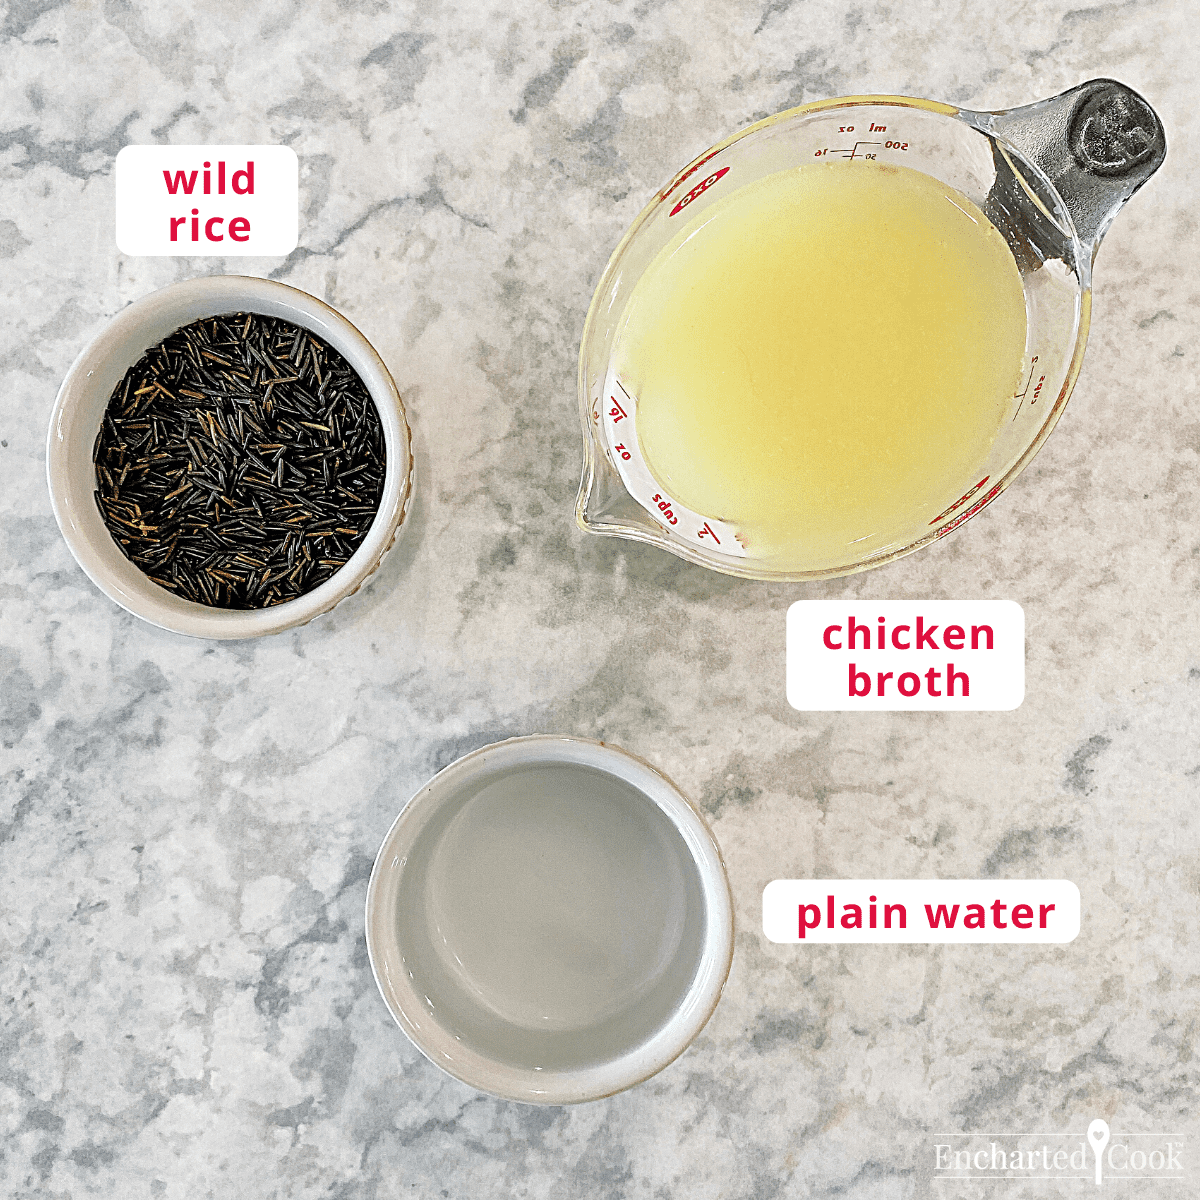 The ingredients, clockwise from top left: wild rice, chicken broth, plain water.